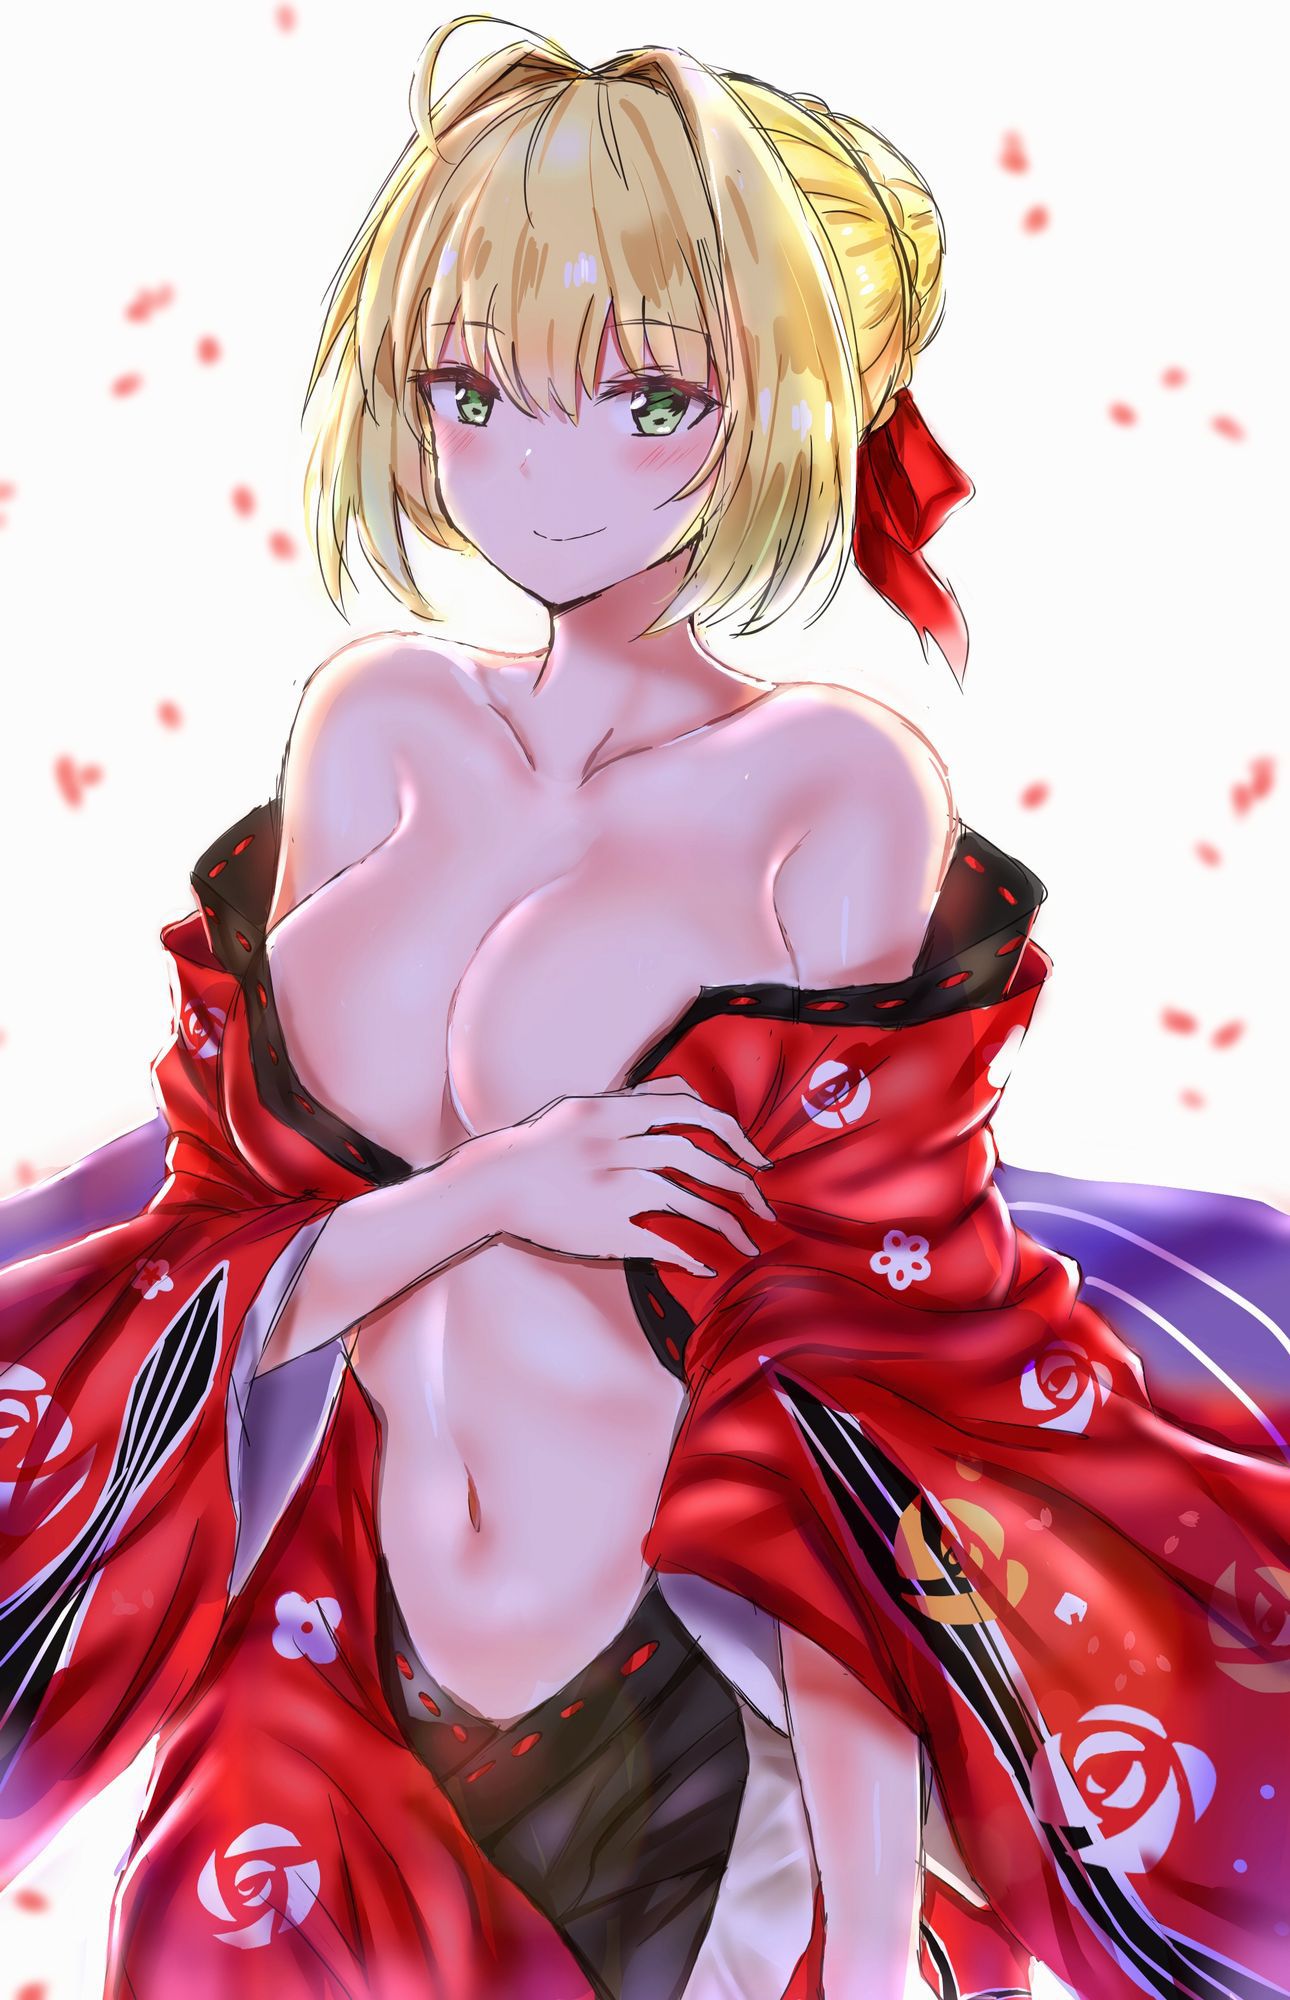 [Secondary ZIP] is about to start anime 100 pieces of cute image summary of Nero Claudius so soon 68